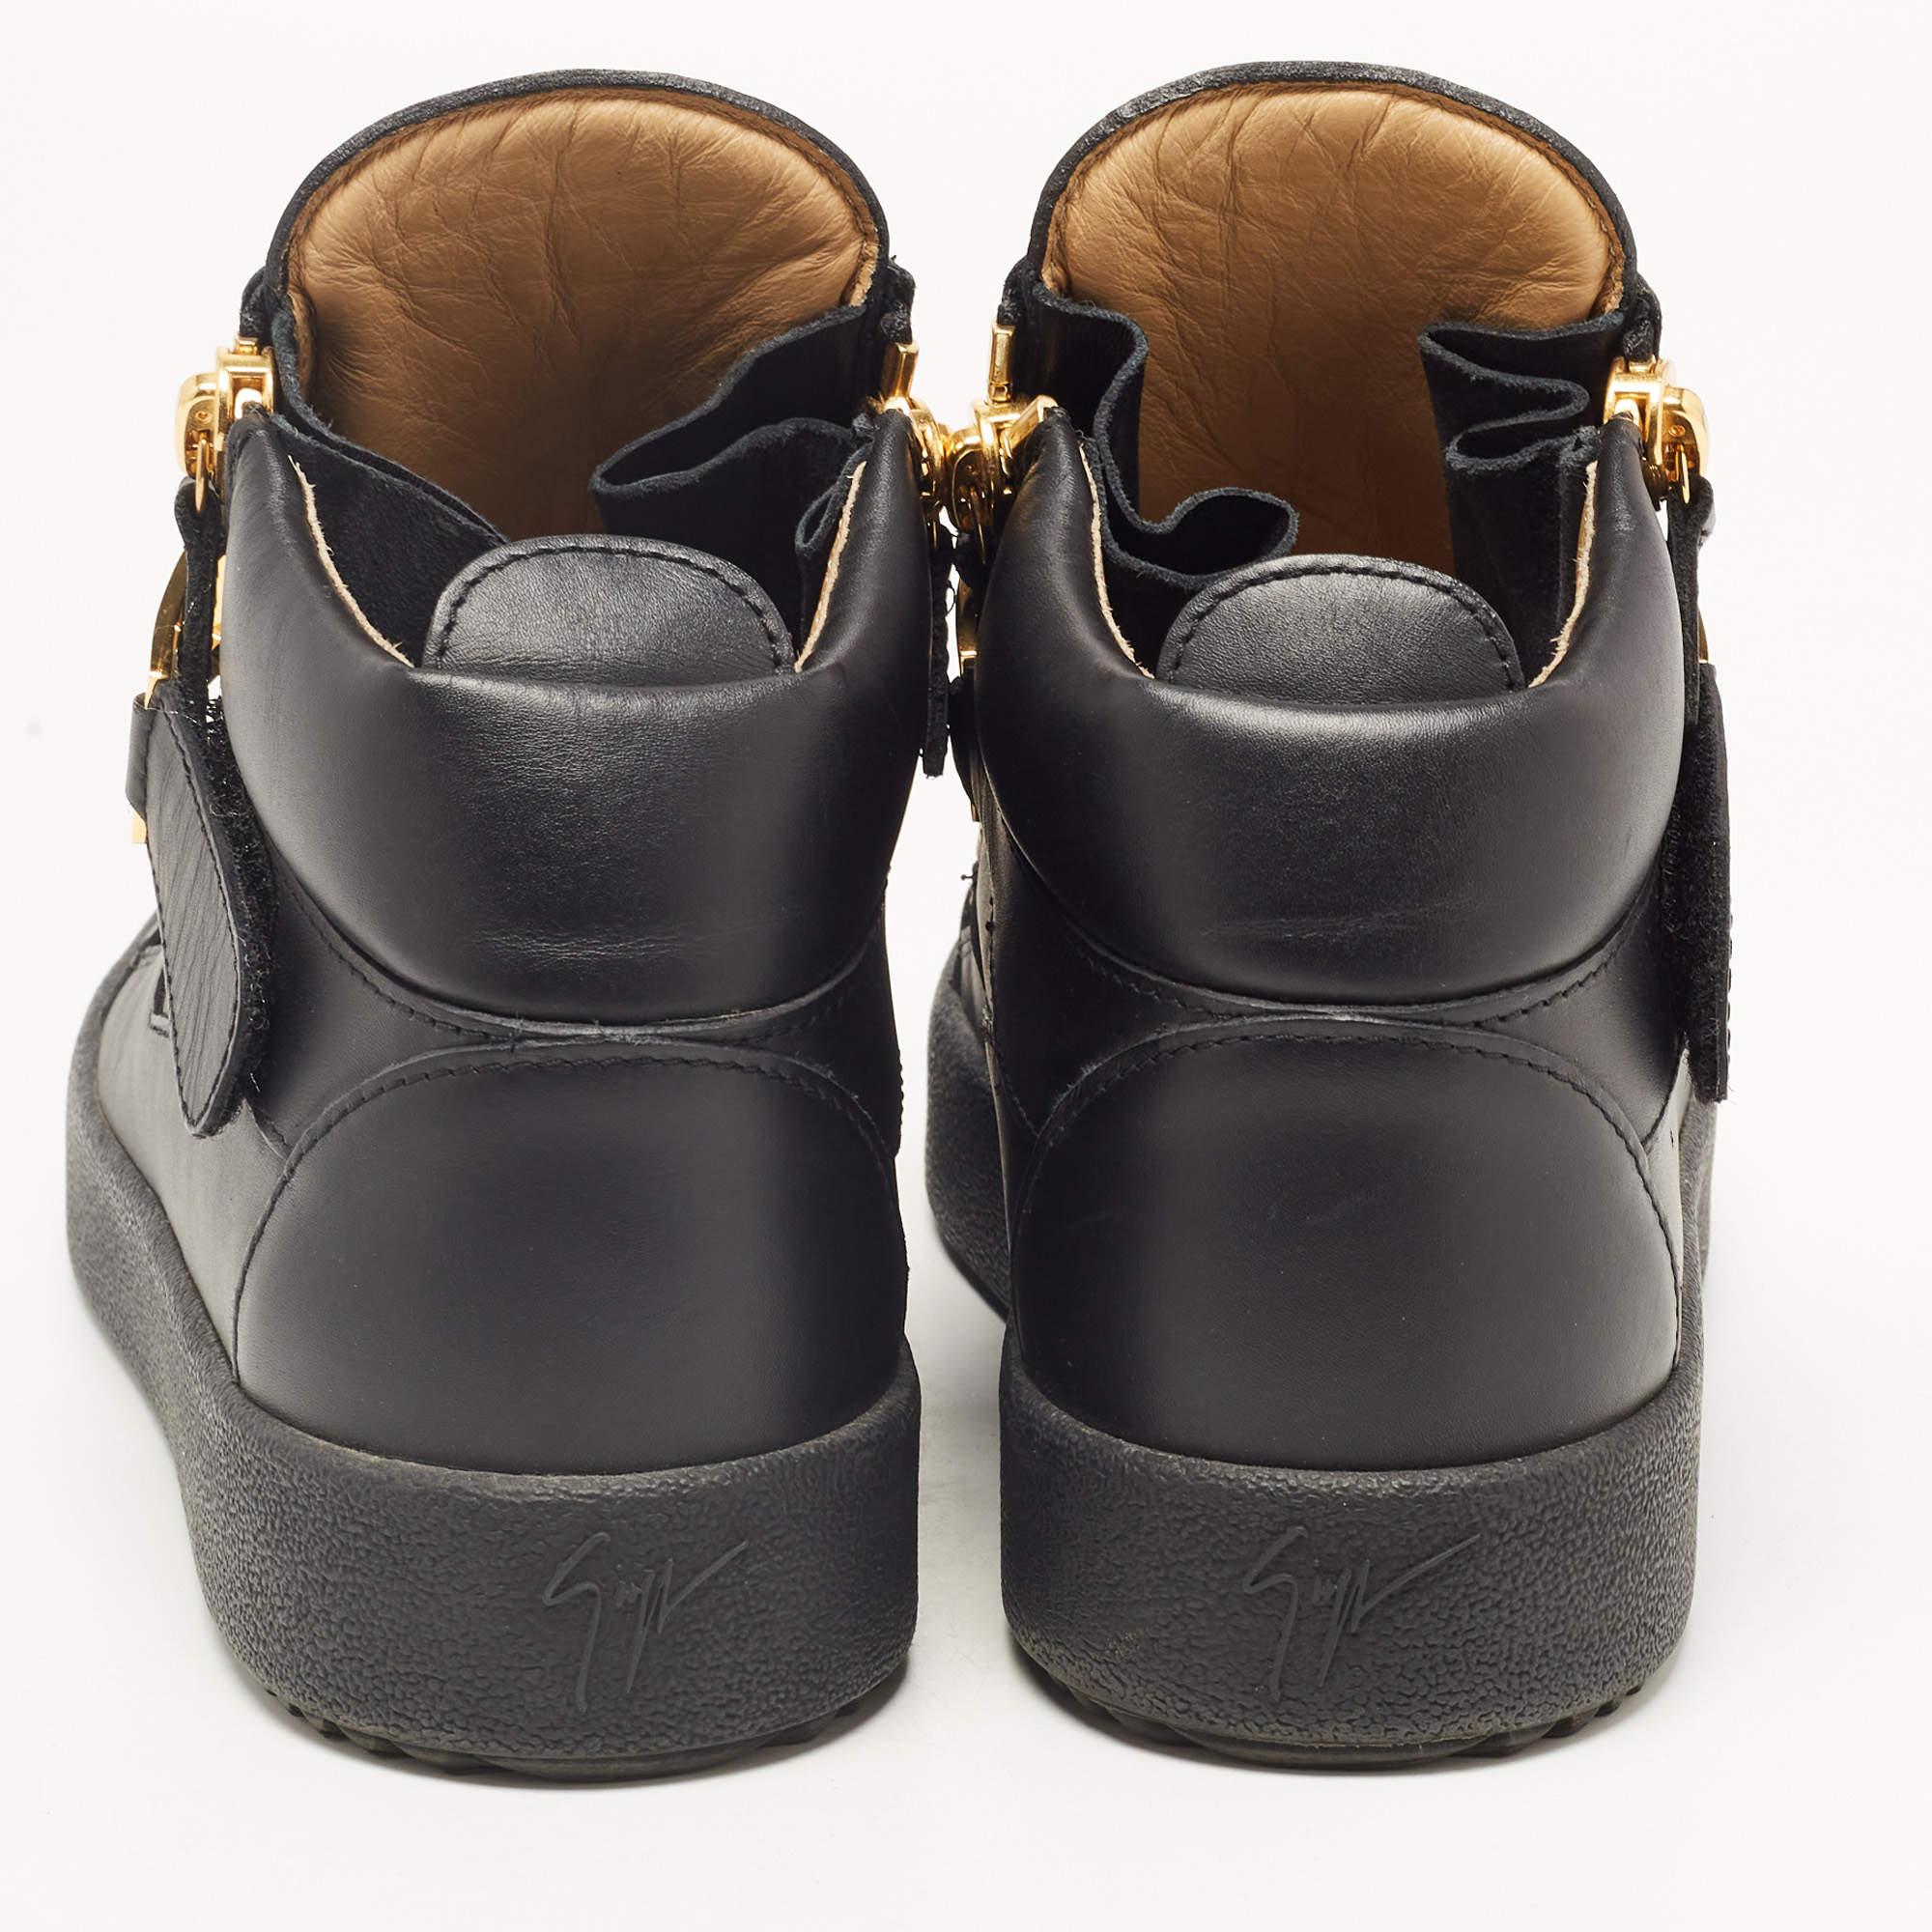 Giuseppe Zanotti Black Leather High Top Sneakers Size 40 For Sale 2